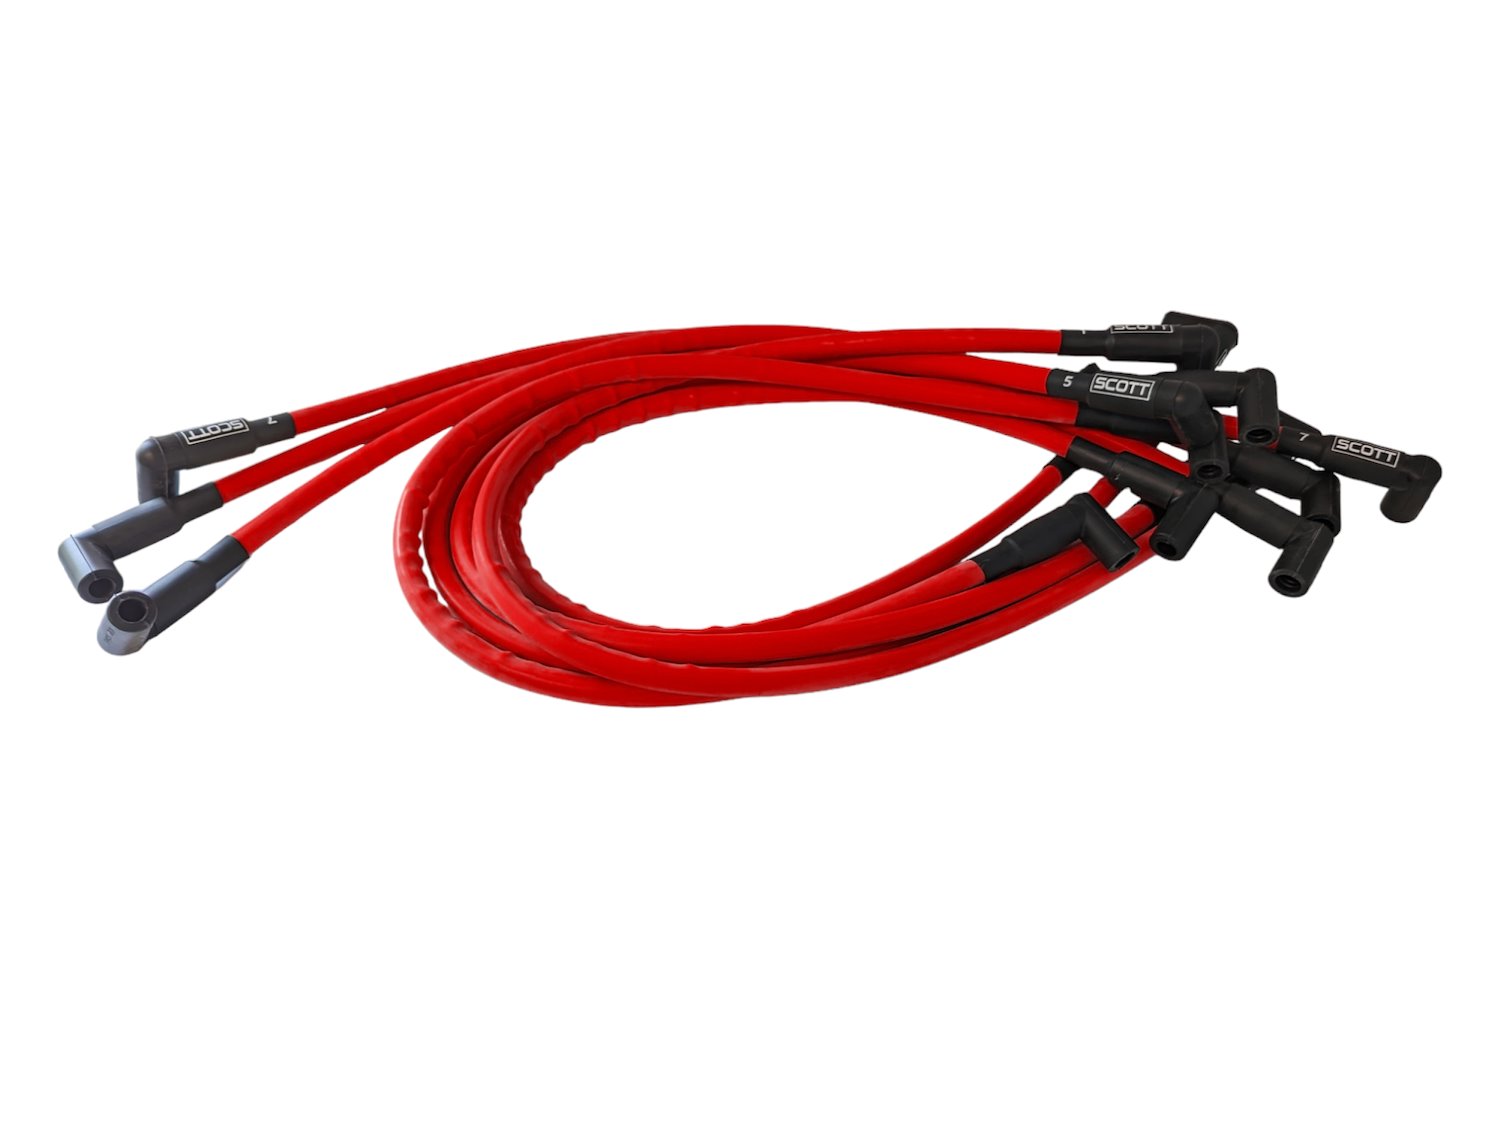 SPW-CH-435-2 High-Performance Silicone-Sleeved Spark Plug Wire Set for Small Block Chevy, Around Front [Red]